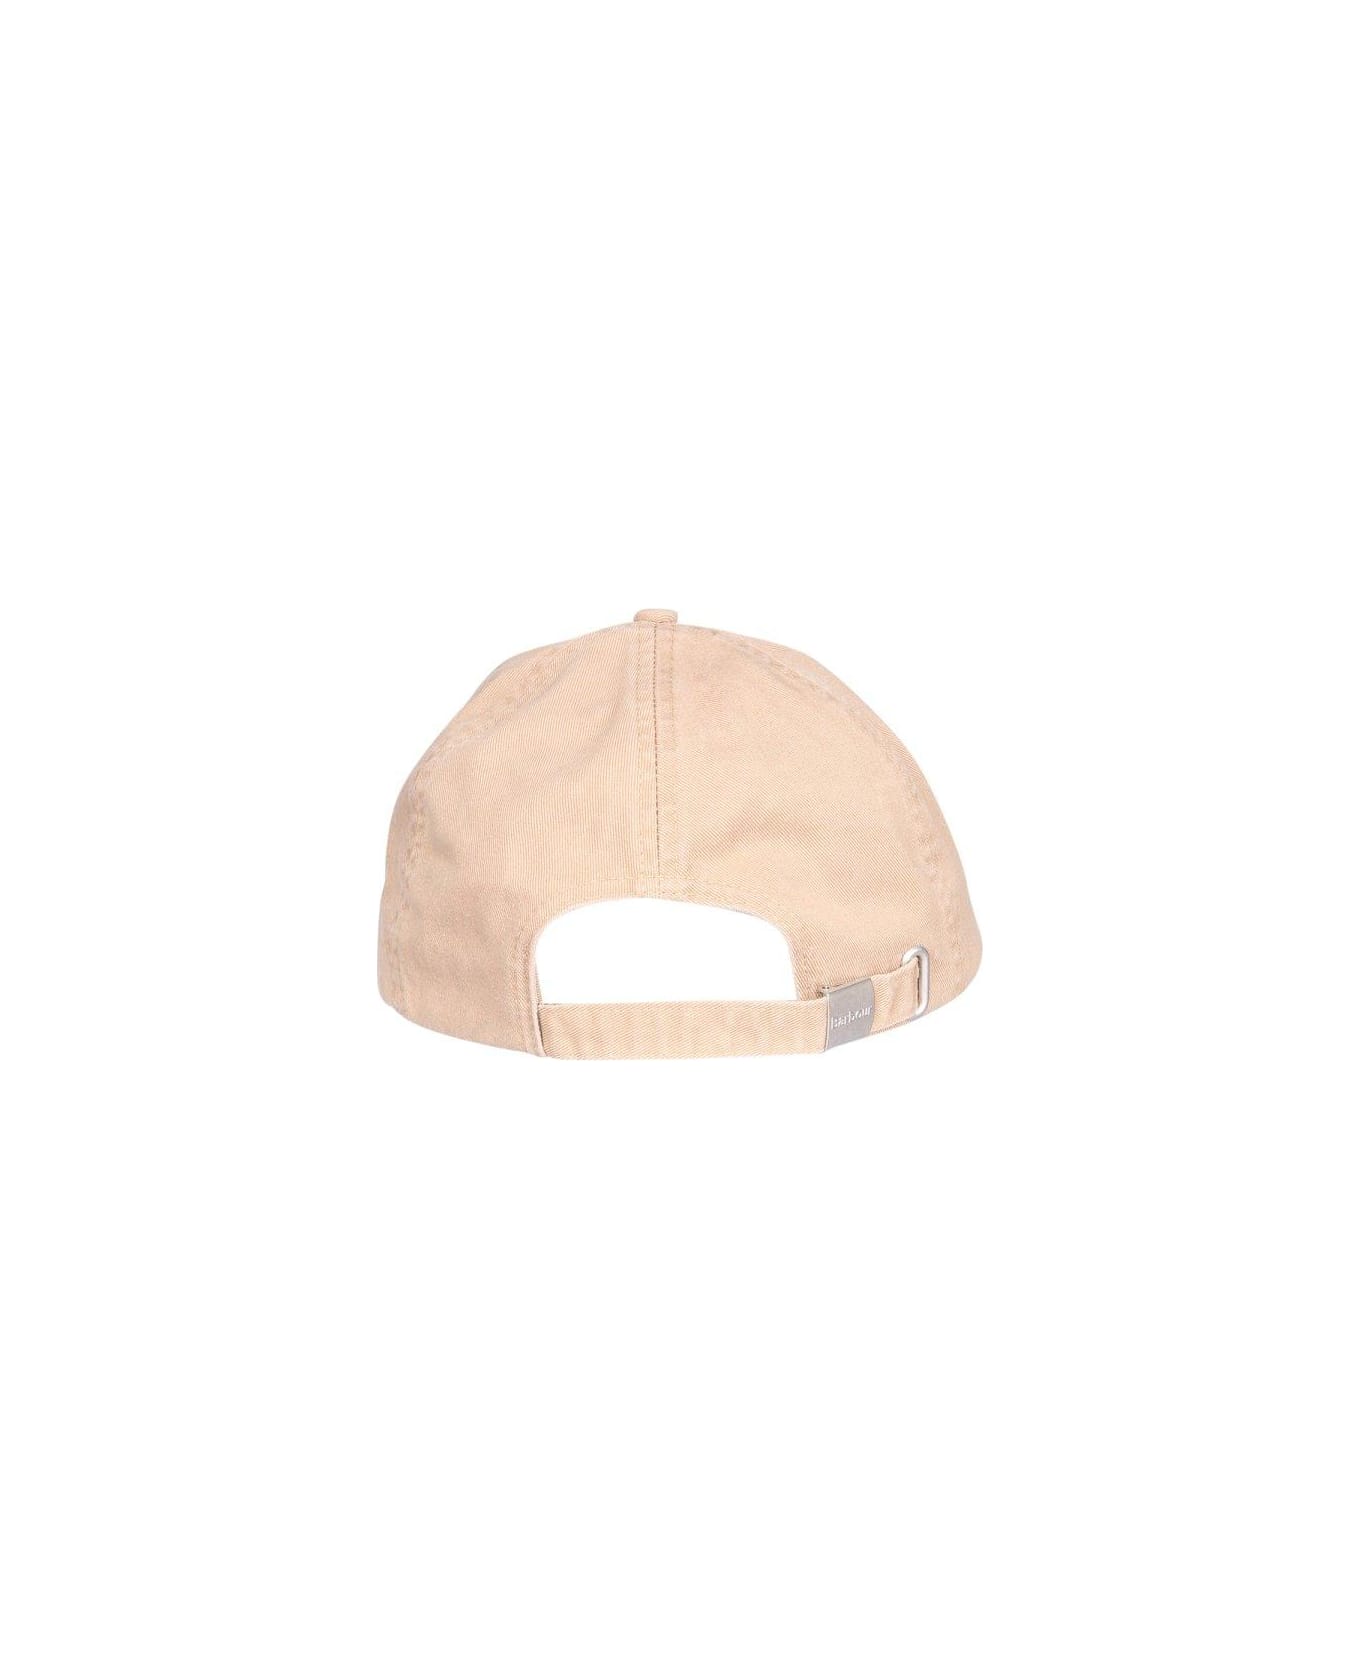 Barbour Logo Embroidered Baseball Cap - Stone